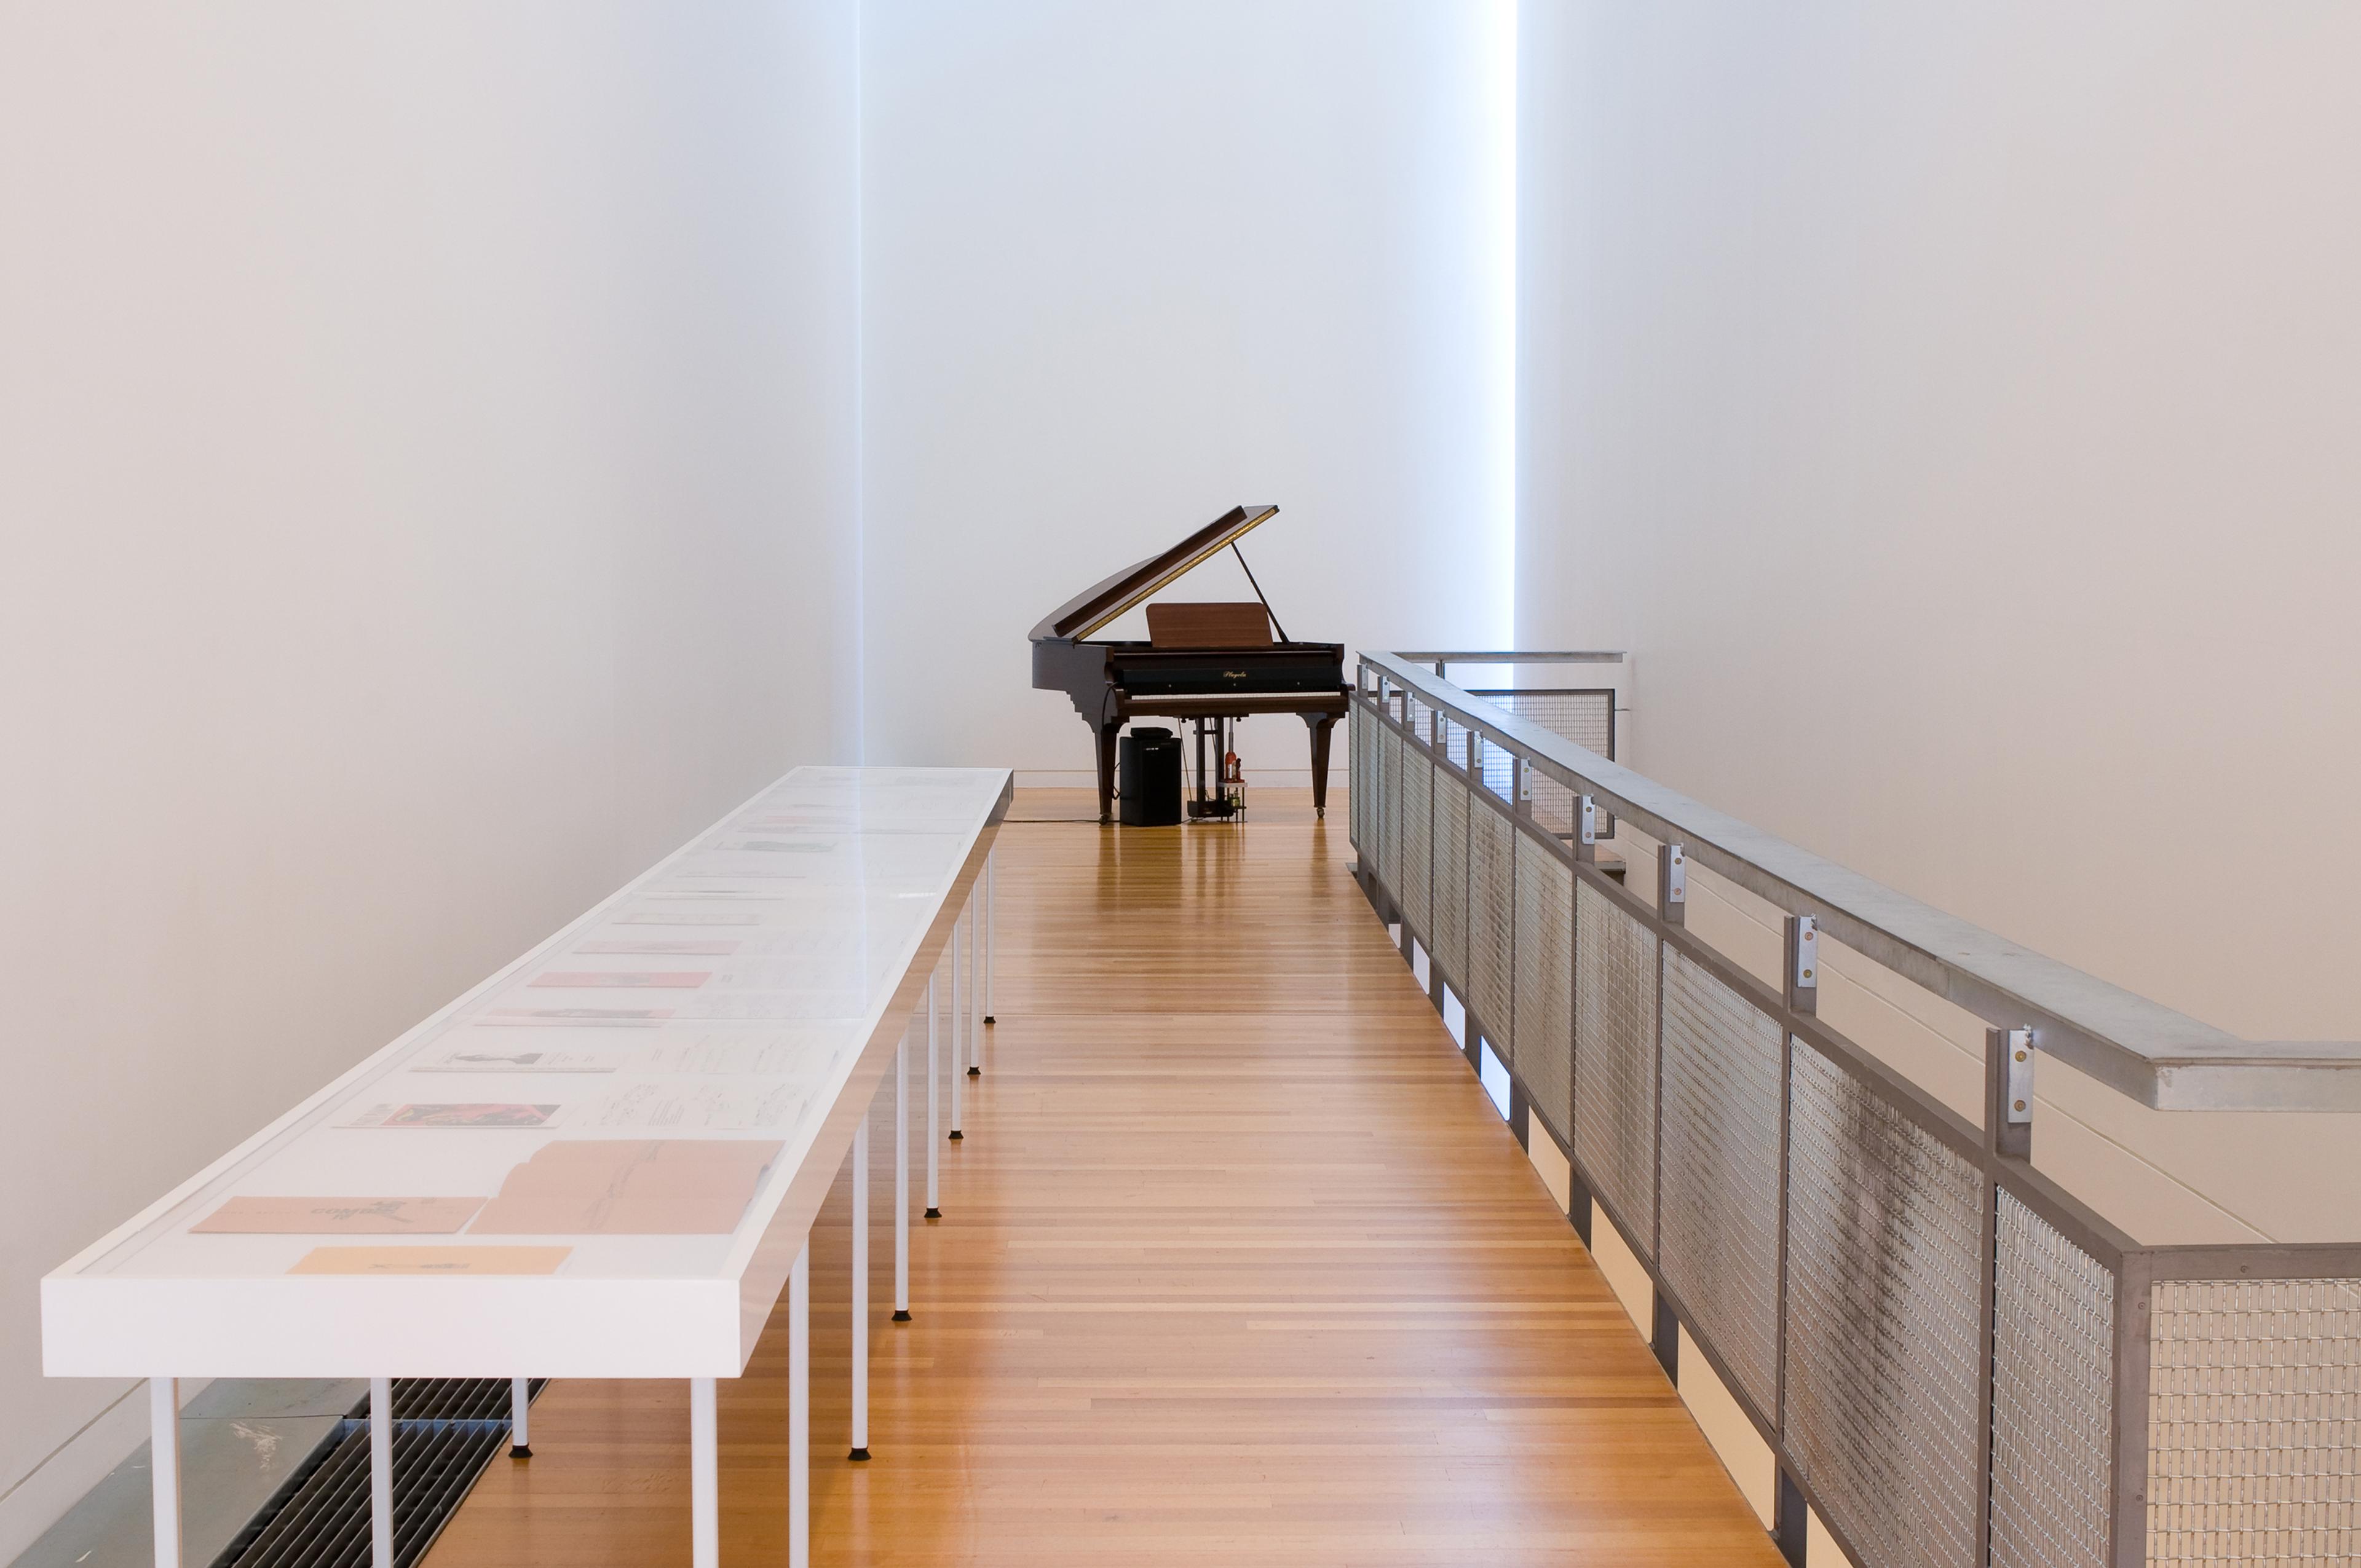 Slave Pianos (of the Art cult), 1998-99. Installation view, Play On, Adam Art Gallery, Victoria University of Wellington